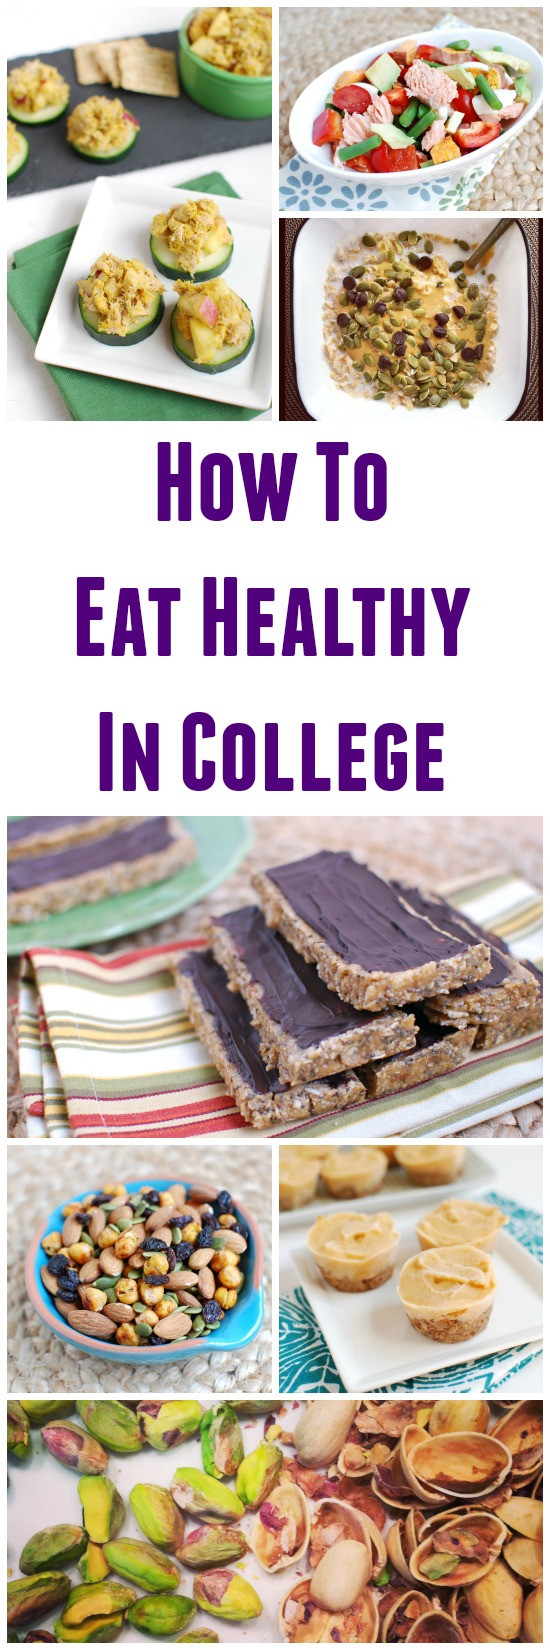 Healthy Snacks For College
 How to Eat Healthy in College